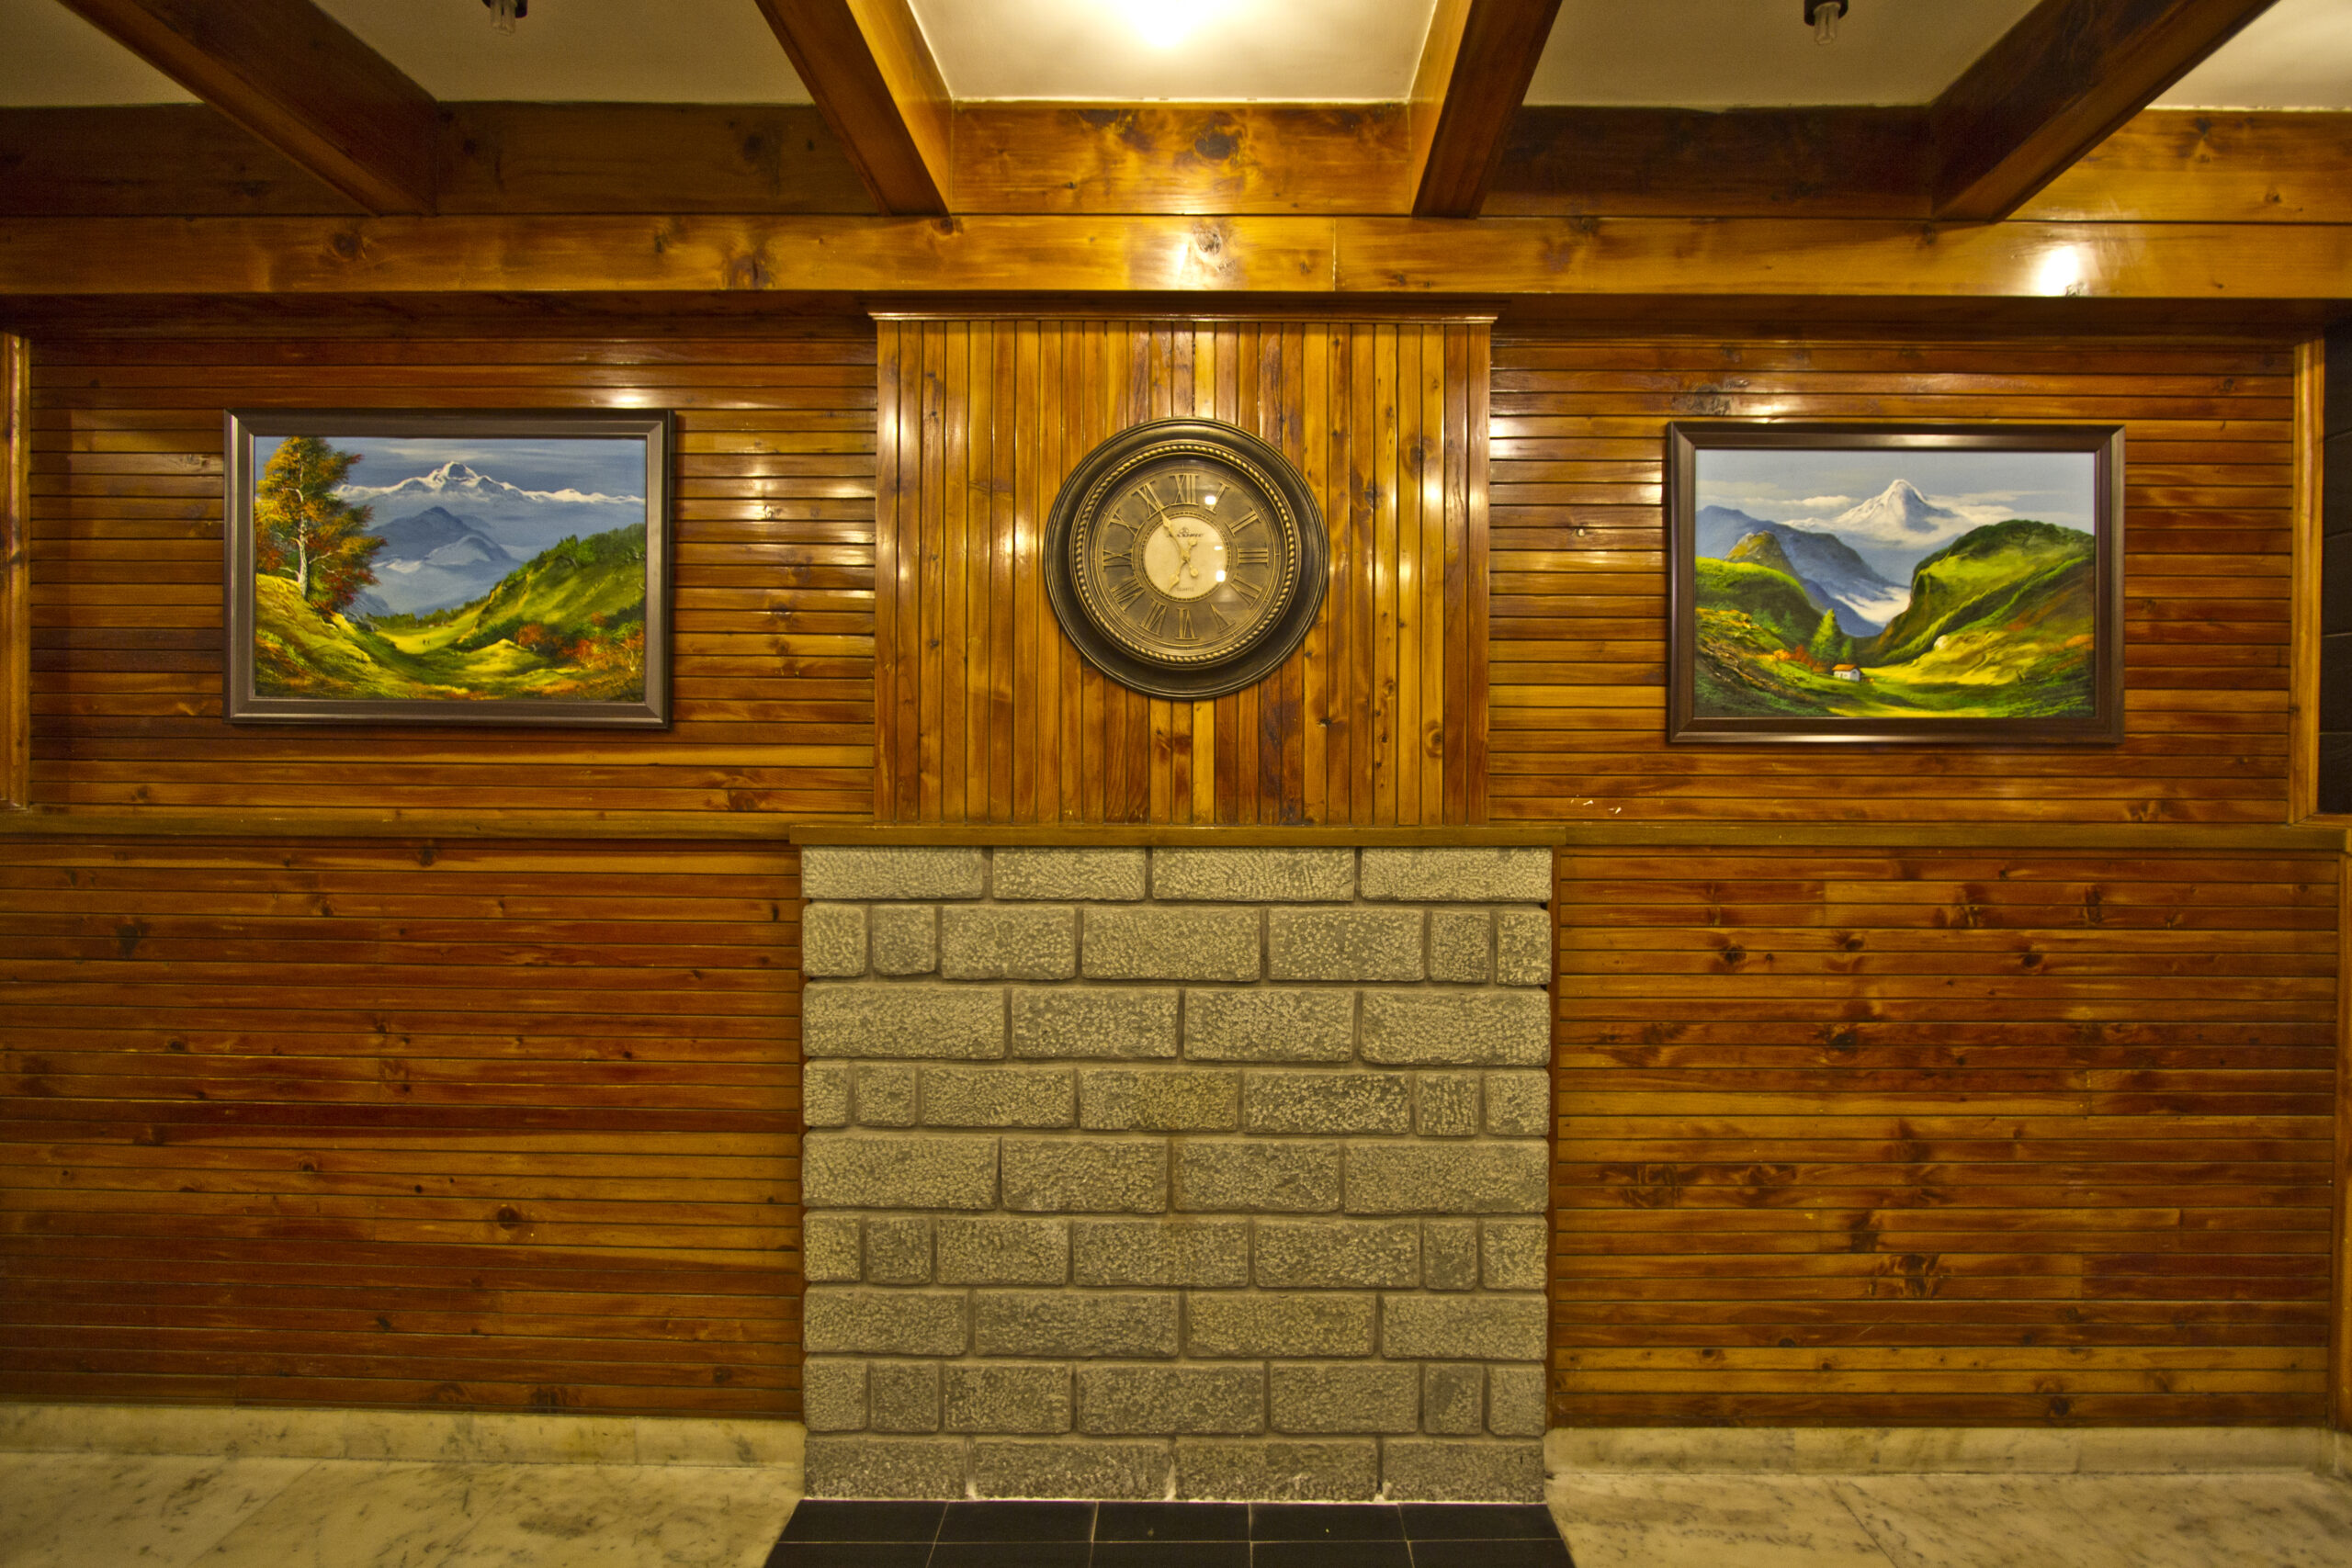 How to get benefited from online hotel booking in Manali